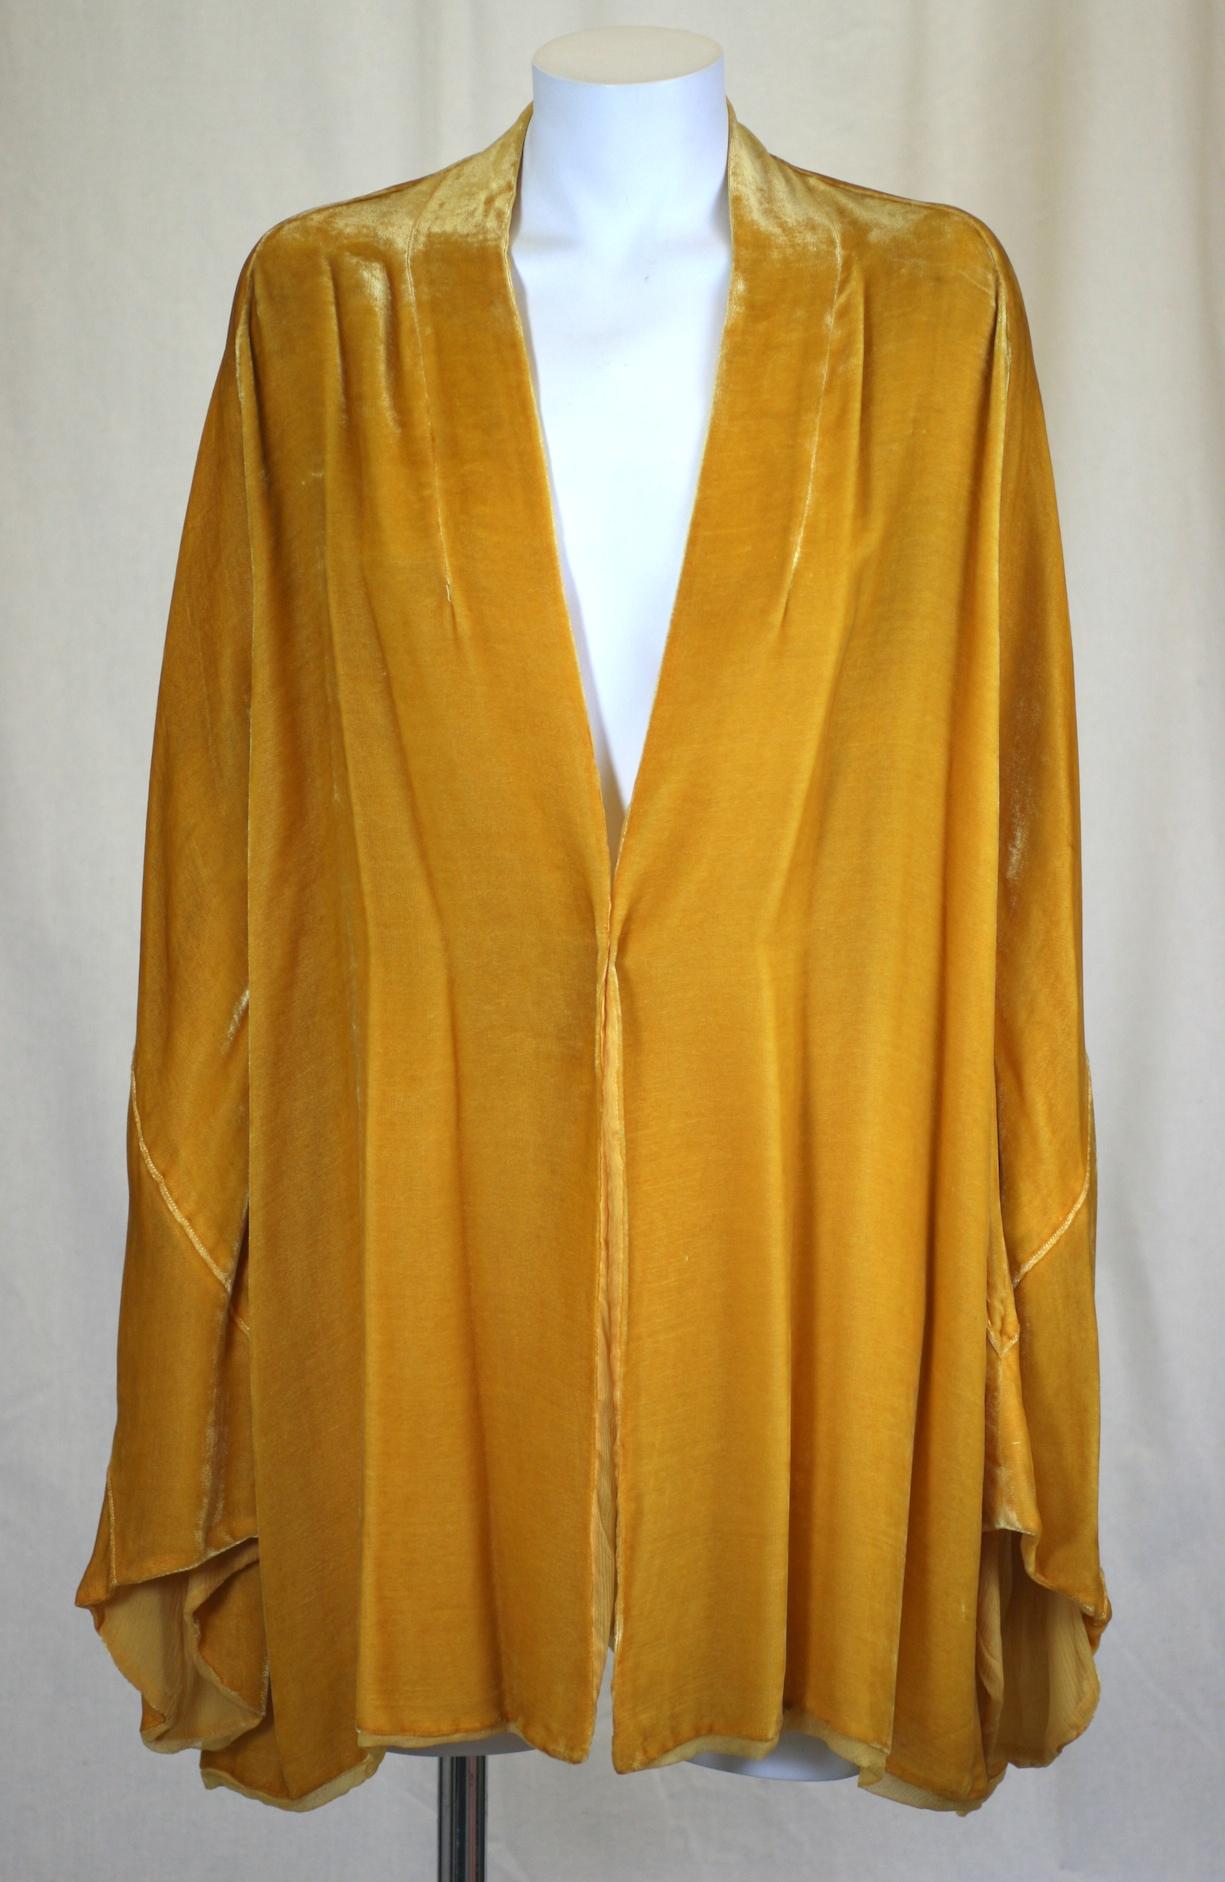 Dramatic Art Deco Yellow Silk Velvet Dressing Jacket from the 1920's retailed by L.P. Hollander. NY-Boston. Marigold yellow silk velvet is cut with dramatic Art Deco pieced sleeves and is worn open or wrapped. No closures.
Lined in fine silk